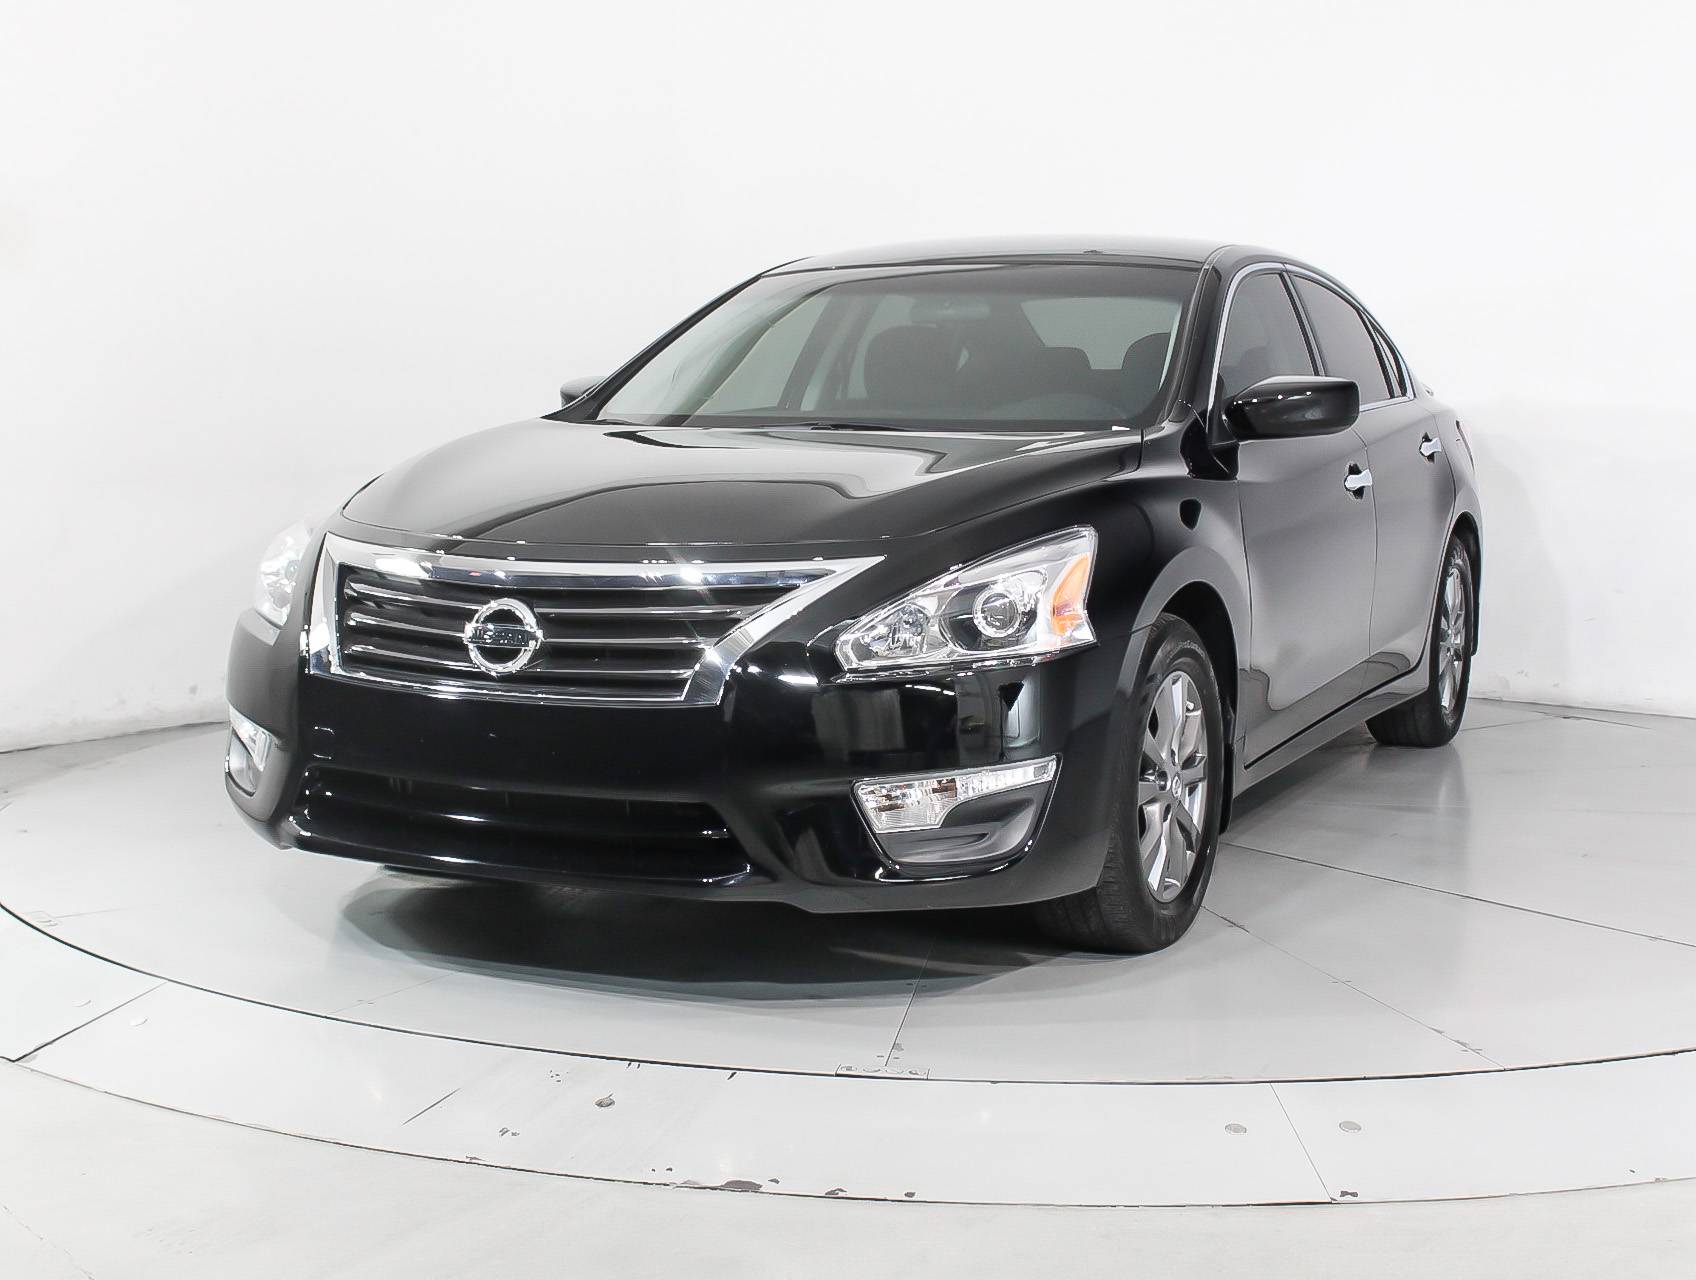 Florida Fine Cars - Used NISSAN ALTIMA 2015 MARGATE Special Edition 